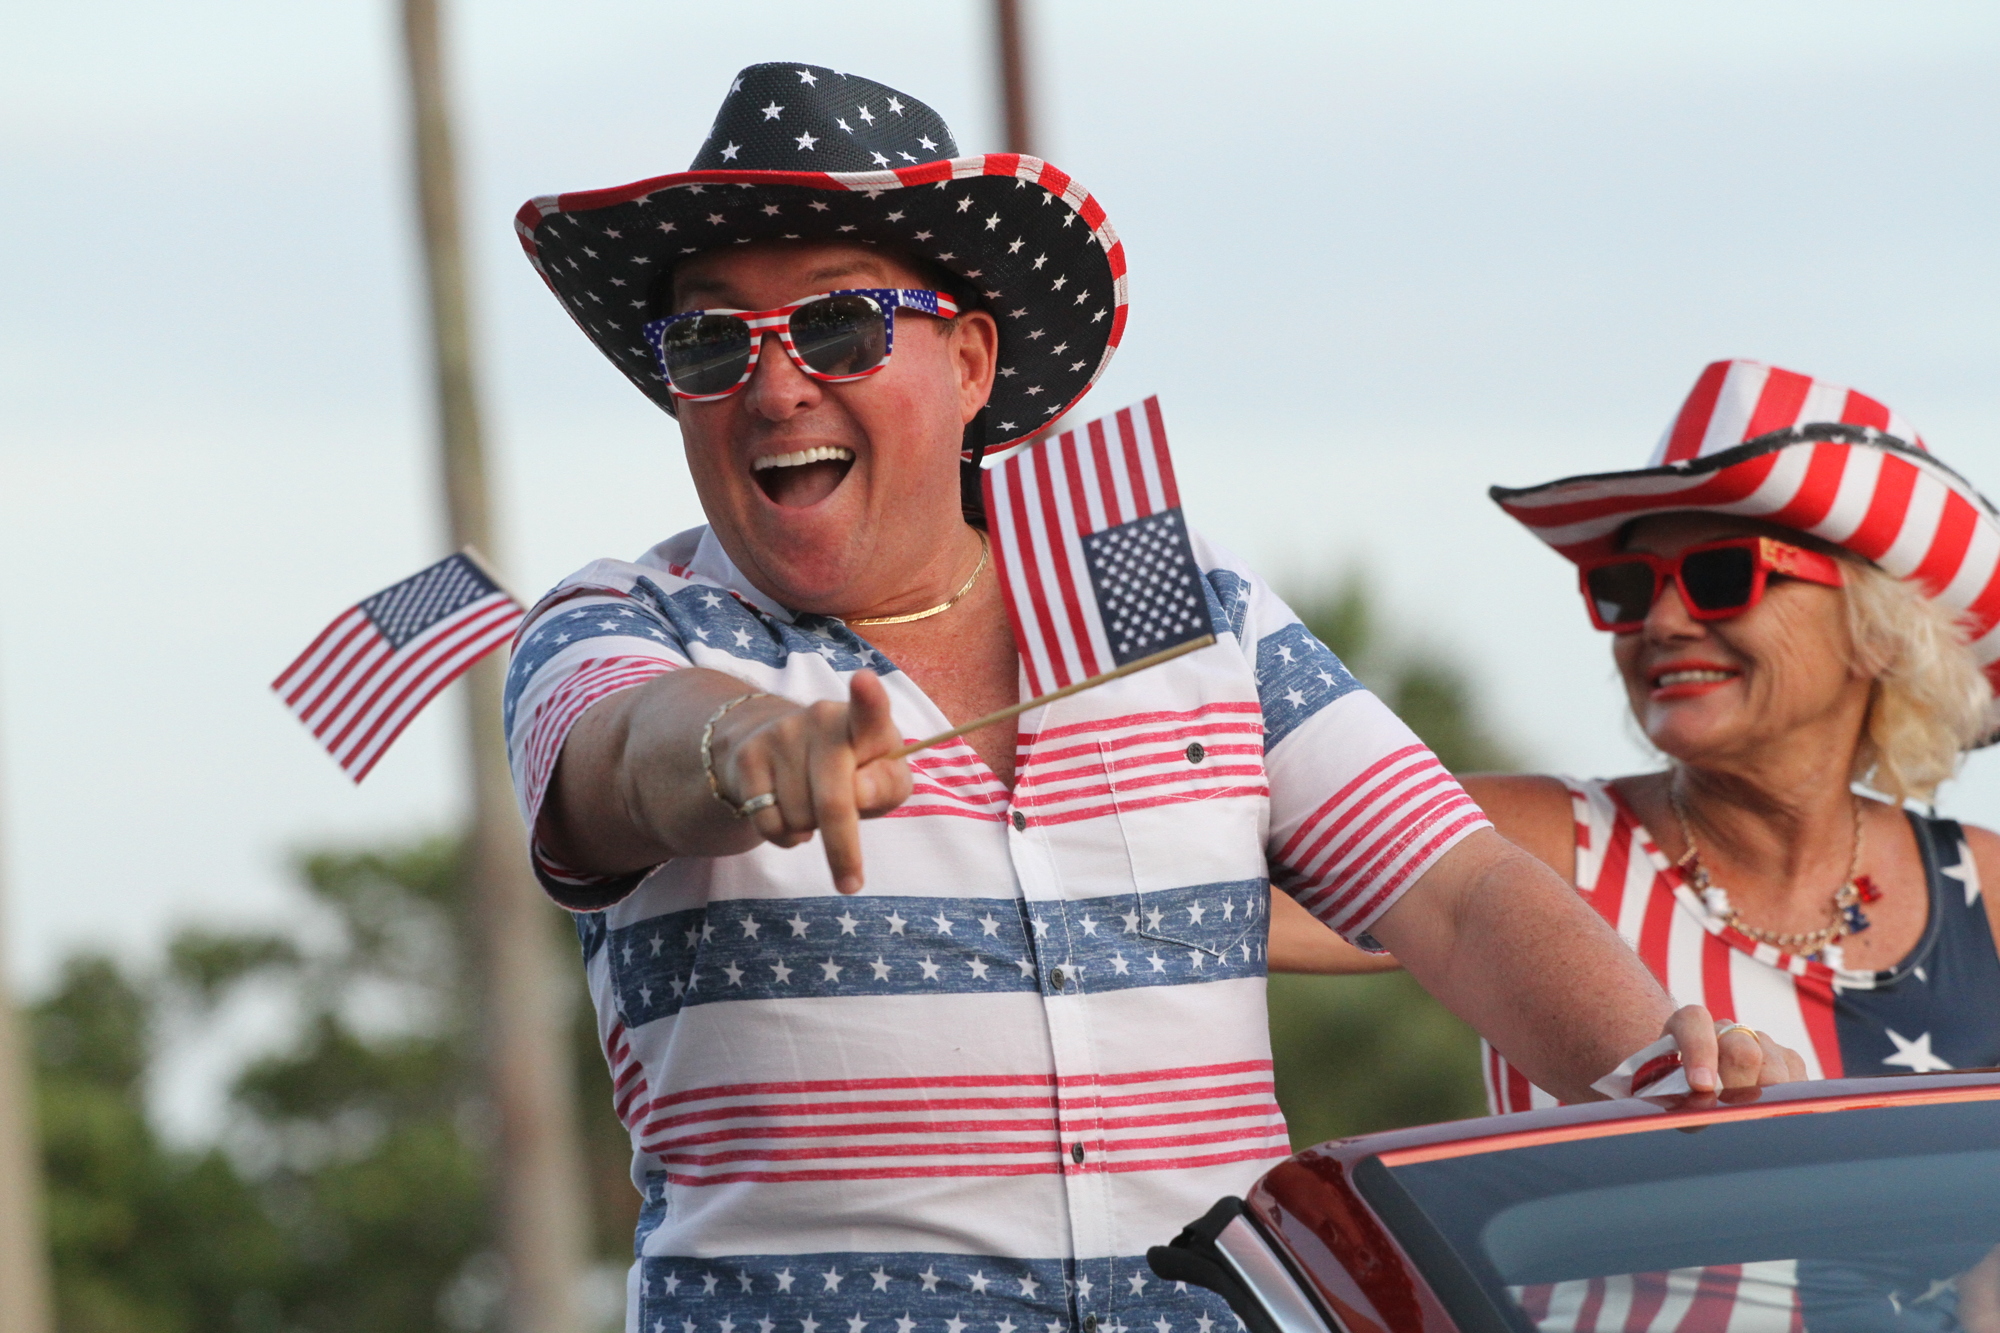 Several groups join in on the patriotic fun at downtown Sarasota's 2021 Fourth of July celebration (File photo)